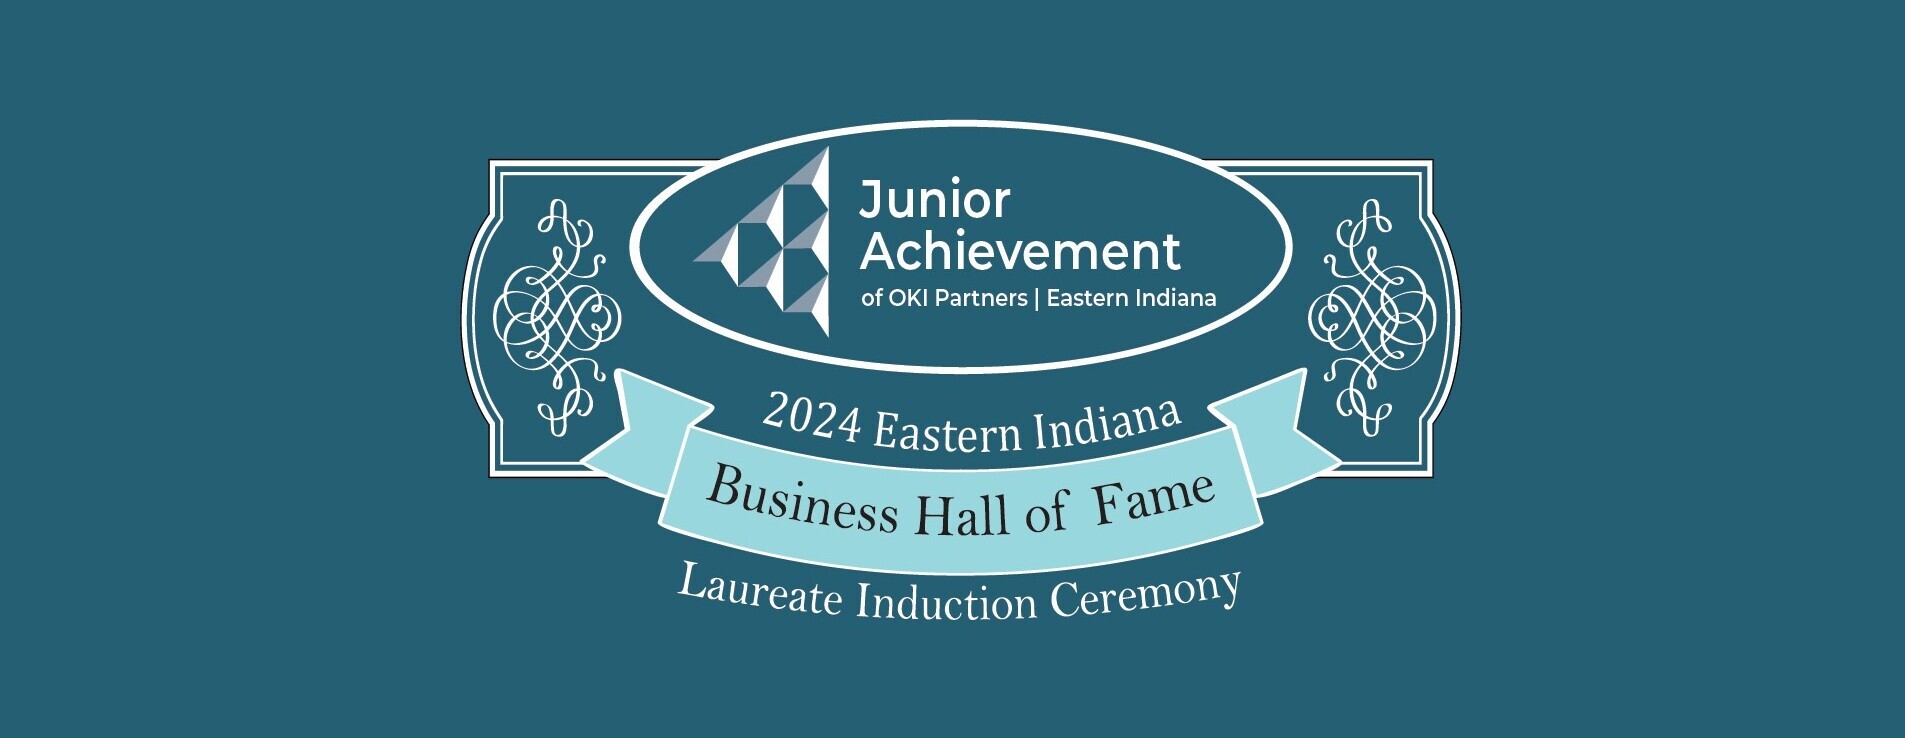 2024 Eastern Indiana Business Hall of Fame